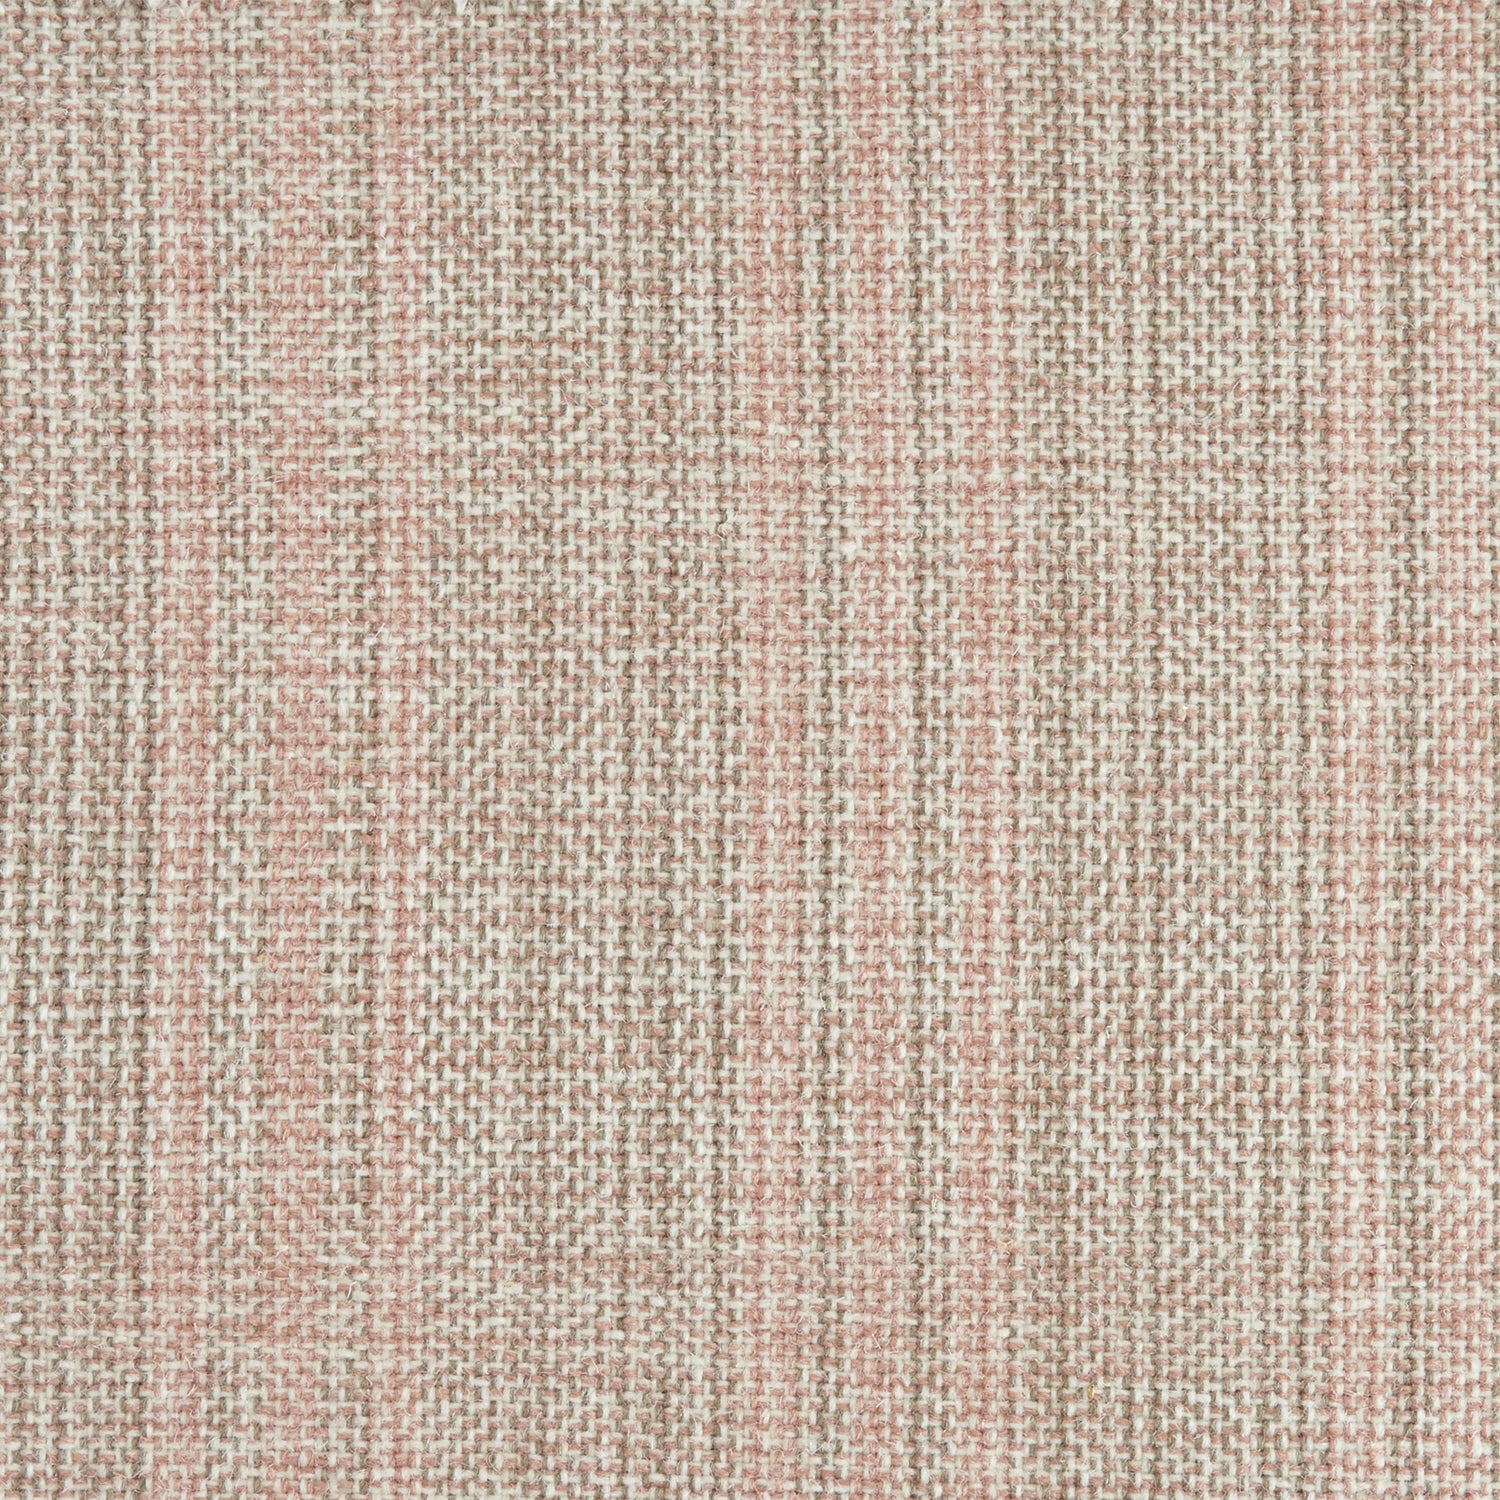 Wool broadloom carpet swatch in a light pink colorway mottled with white and brown fibers.